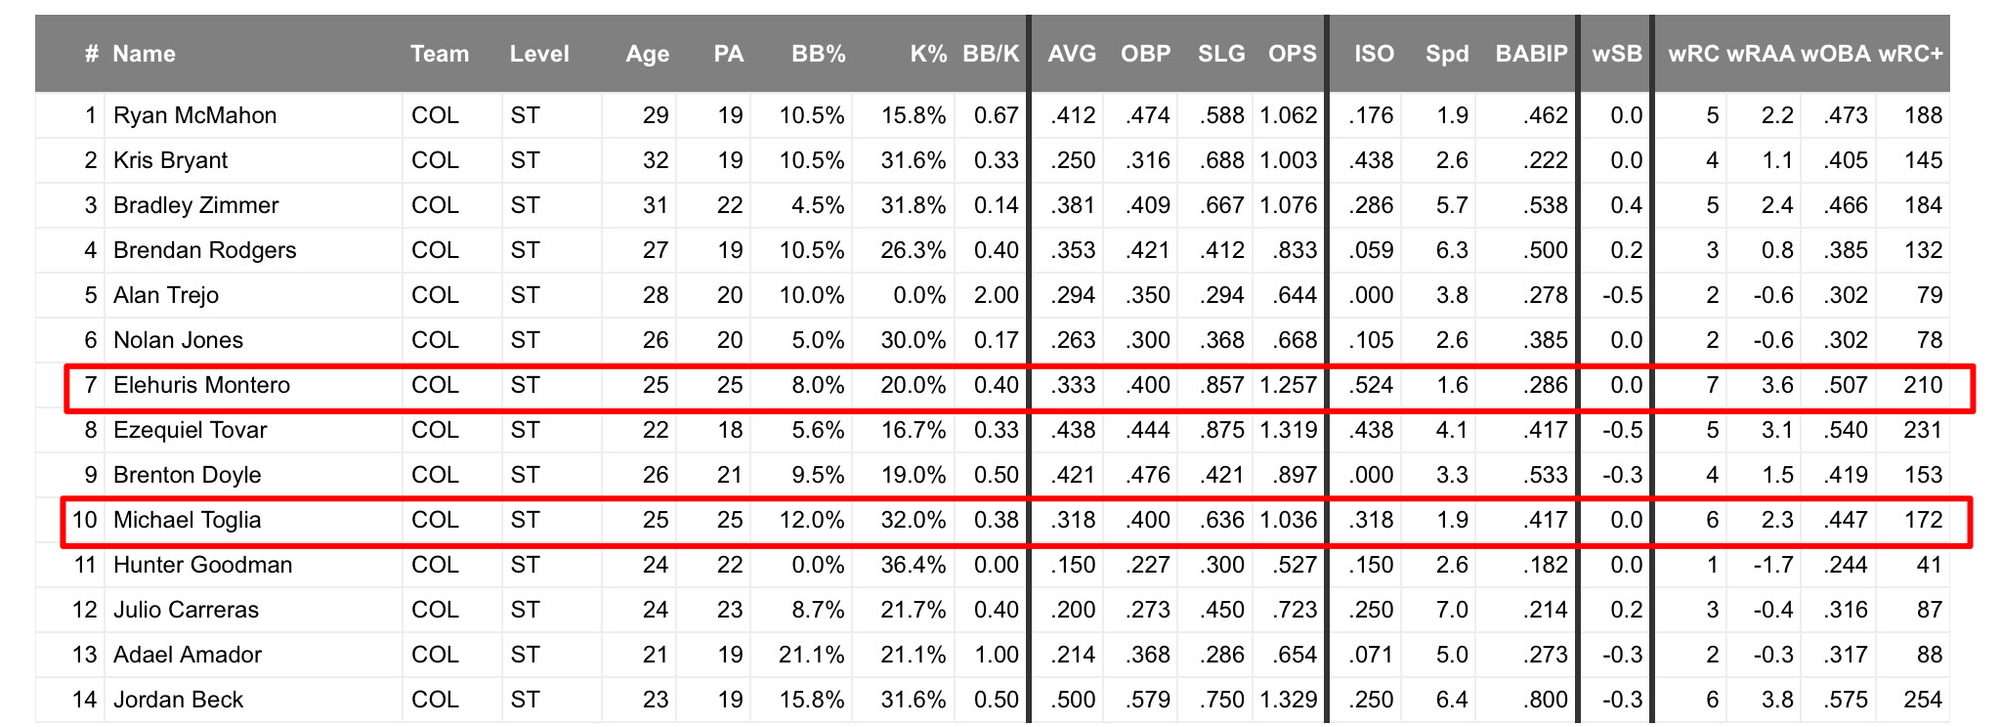 The table from FanGraphs shows the advanced data for all Rockies at spring training. Montero’s and Toglia’s numbers are highlighted with the relevant data being discussed below.